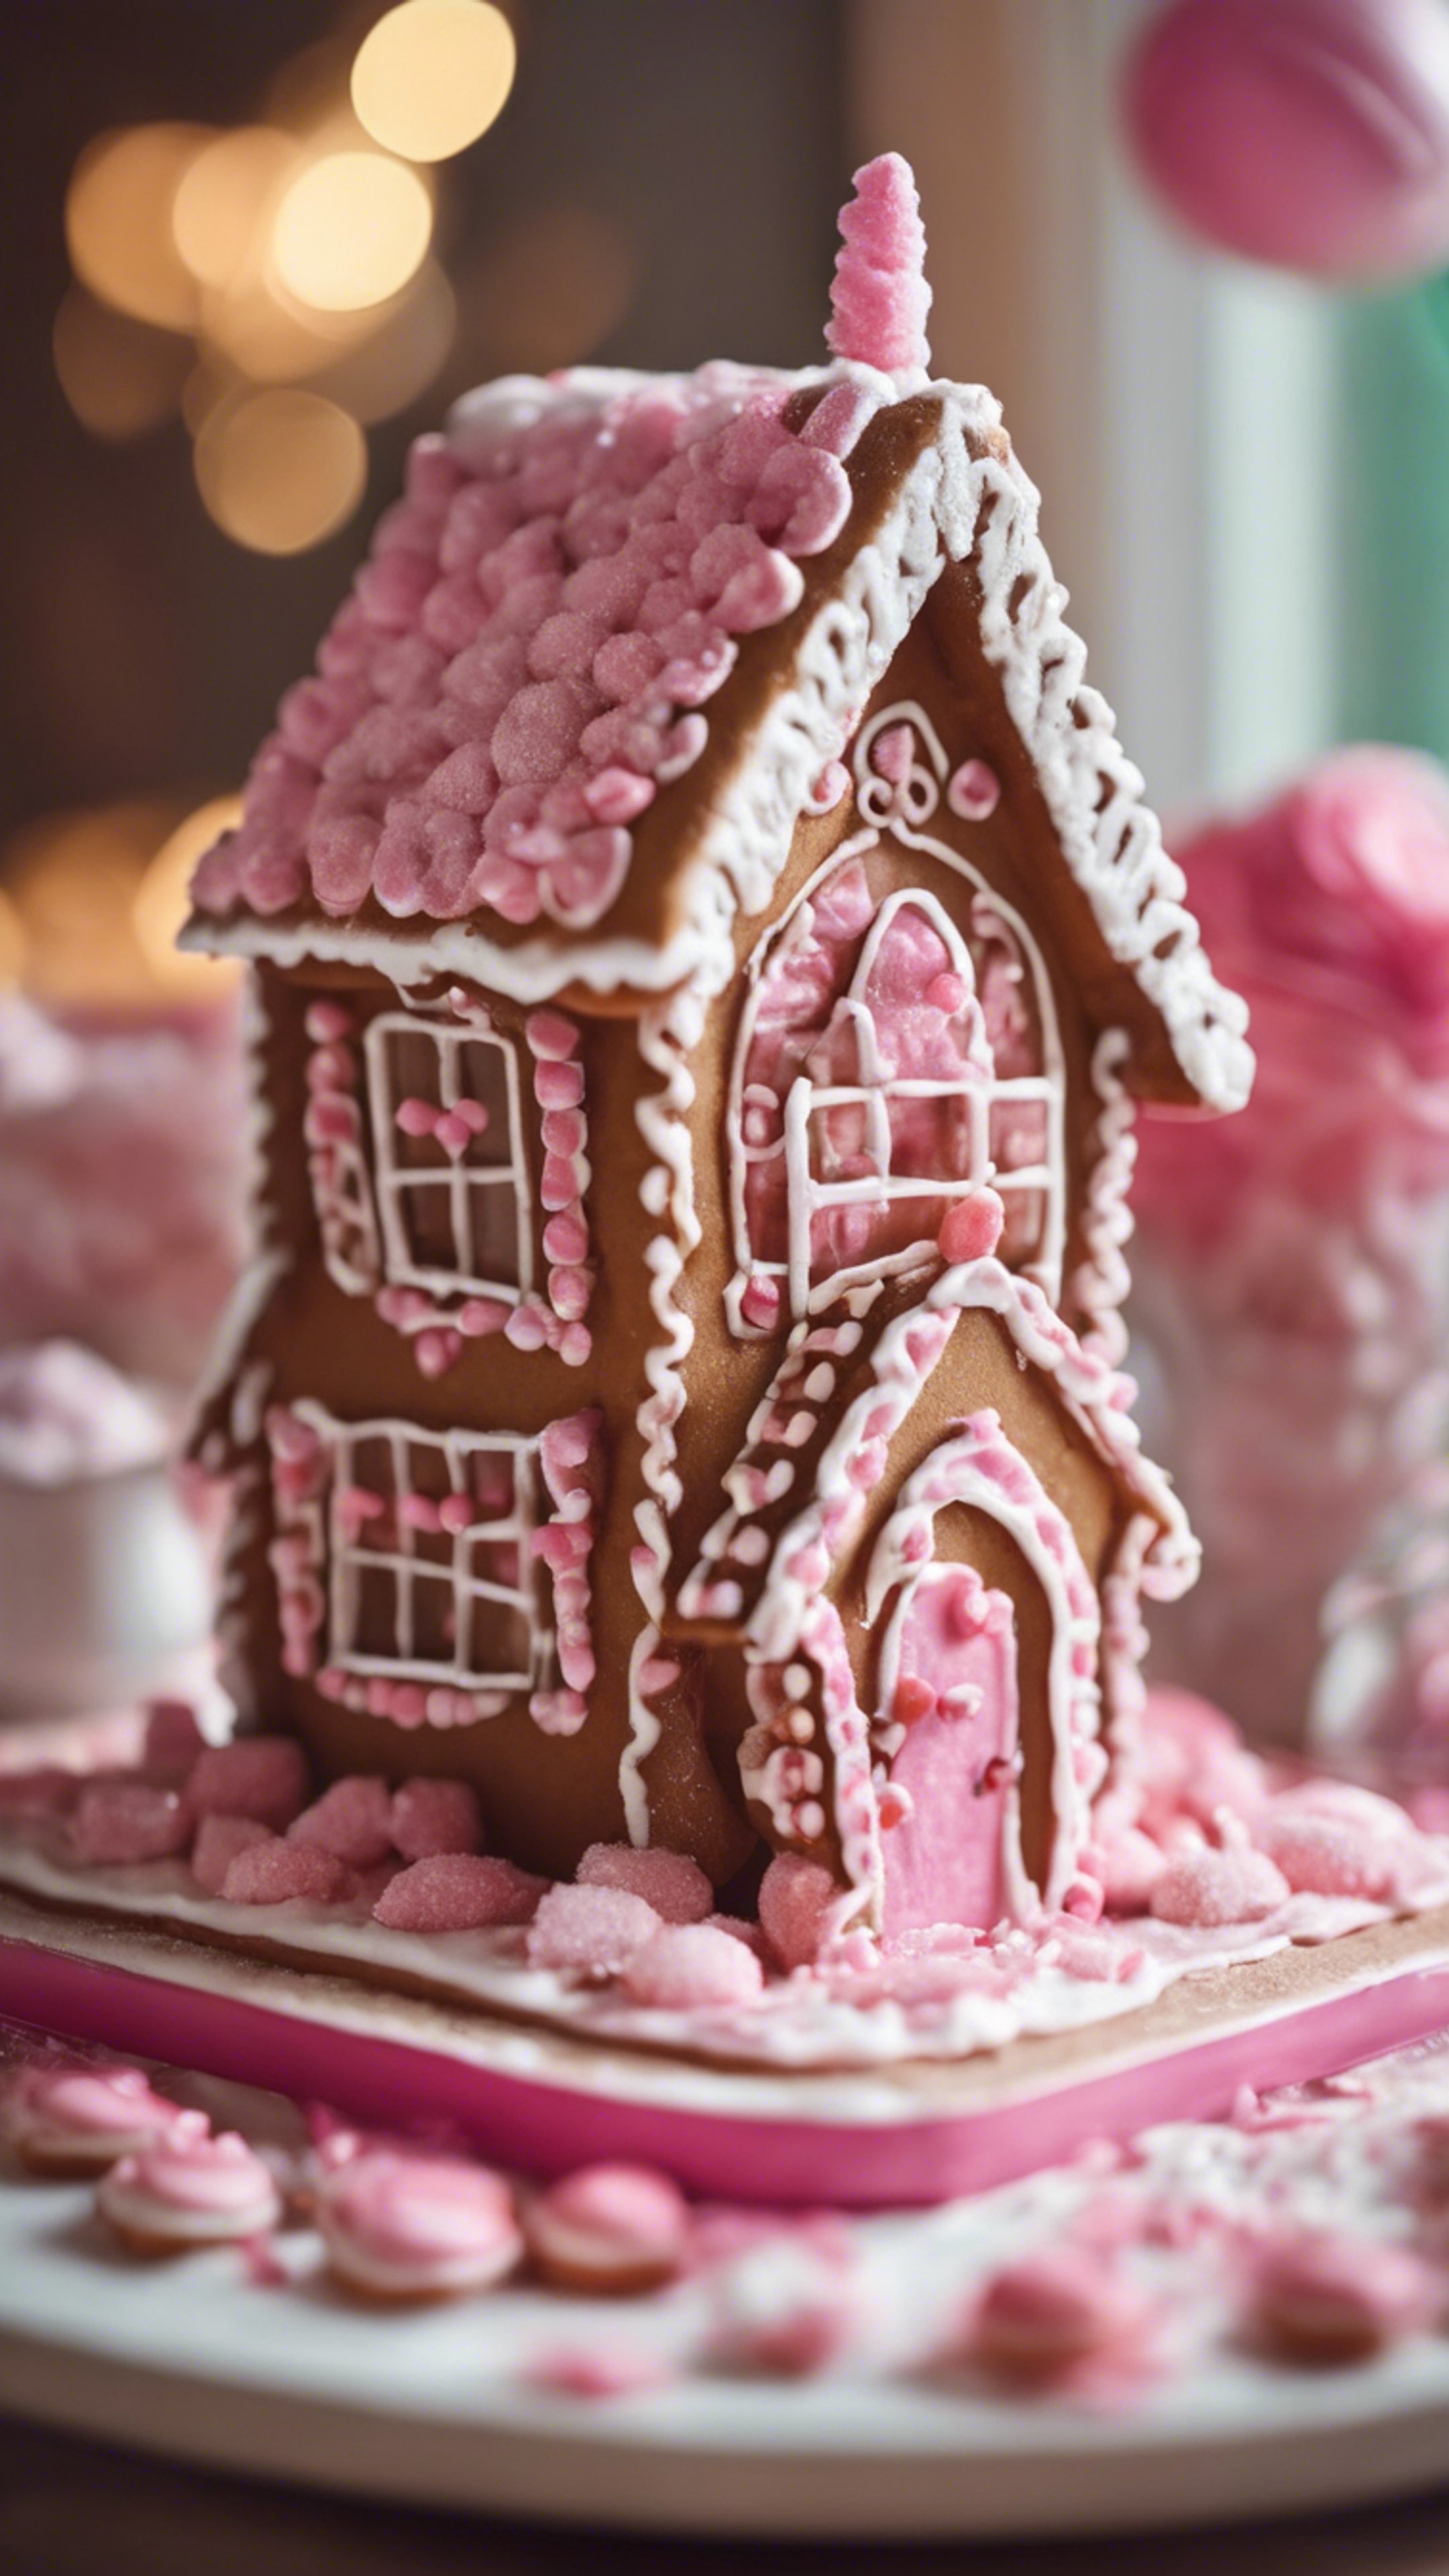 A cute gingerbread house adorned with pink icing and candy. 벽지[80166f7992434f38b590]